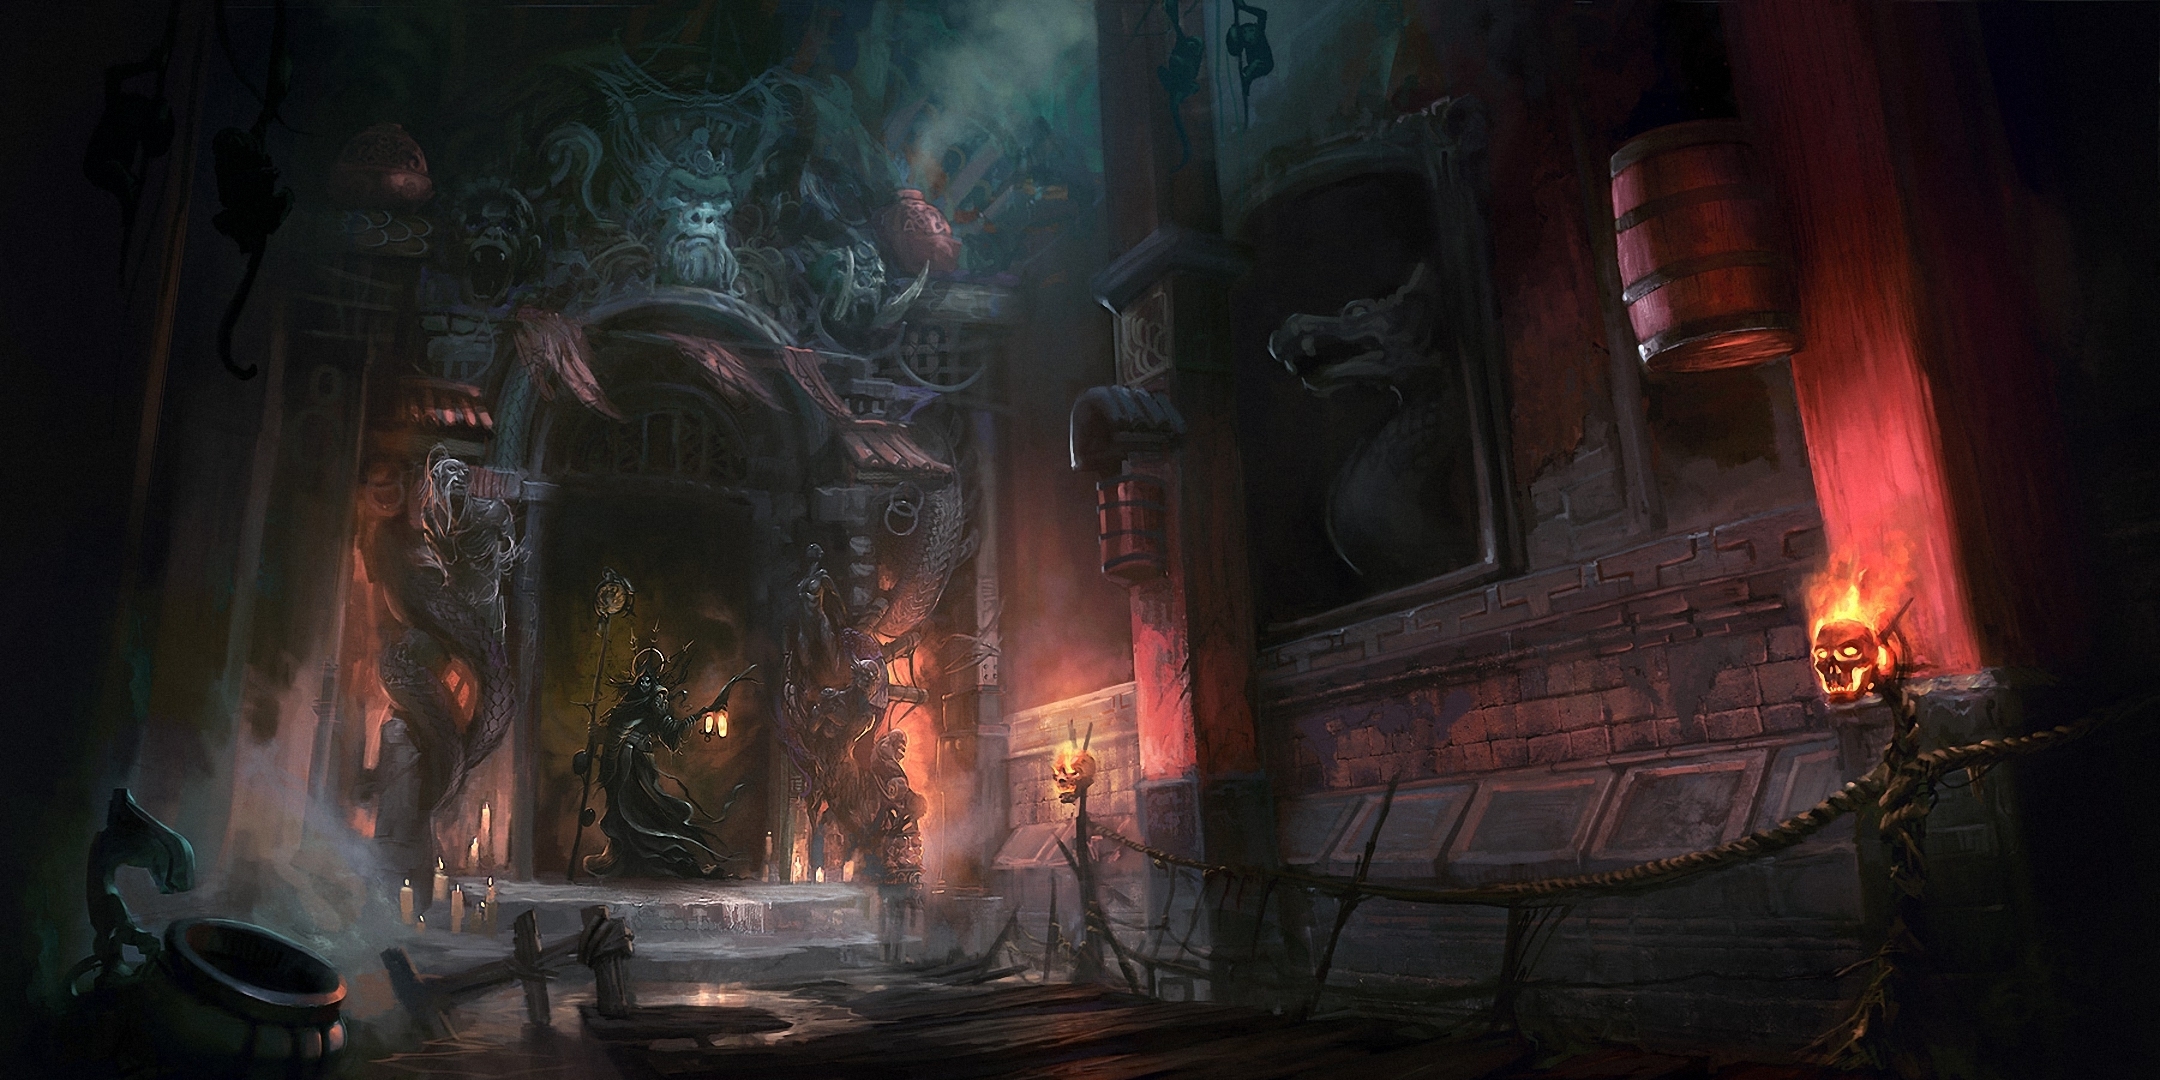 art, Castle, Torches, Fire, Skull, Monster, Candles, Plates, Gloomy, Entrance, Arch, Statue, Skulls Wallpaper